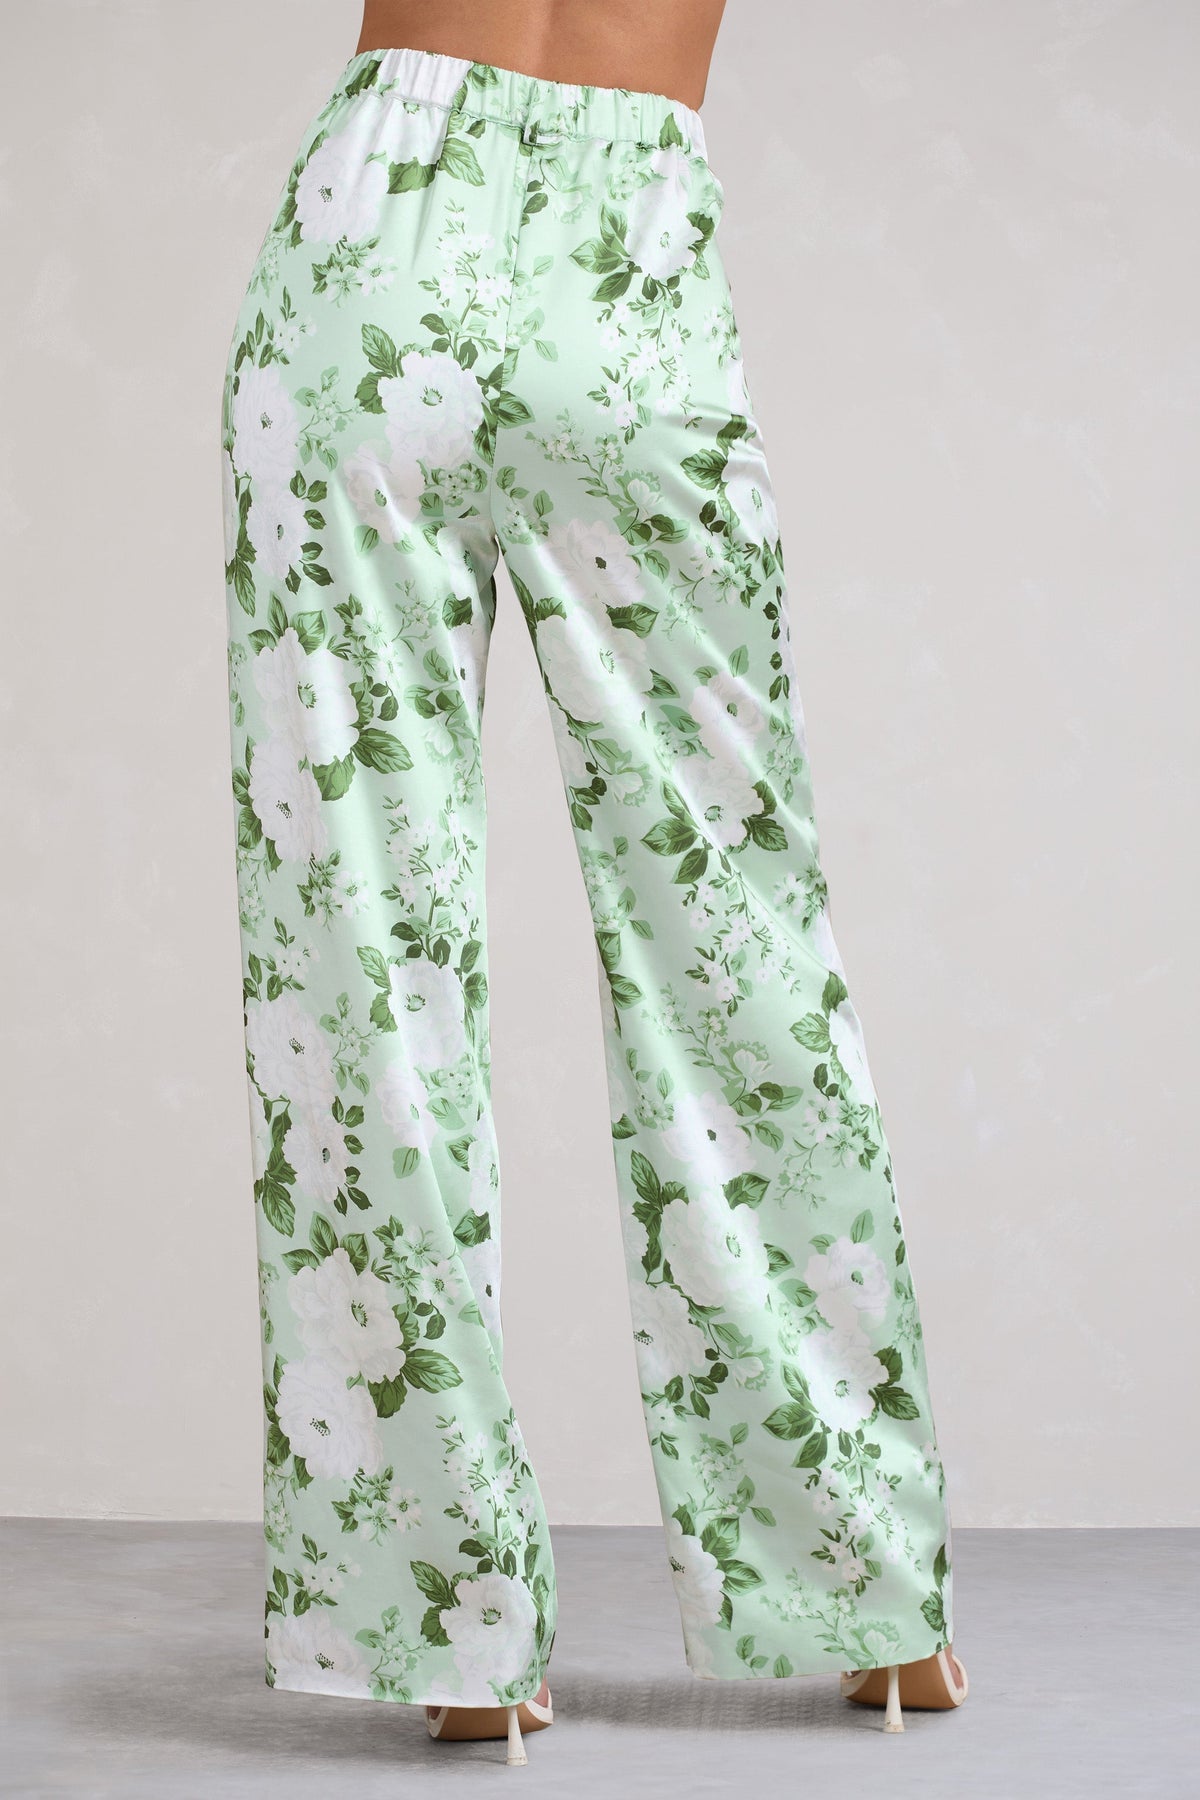 Buy W for Woman Ecru Floral Printed Parallel Pants with  Lace_22FEW61865-118490_S at Amazon.in